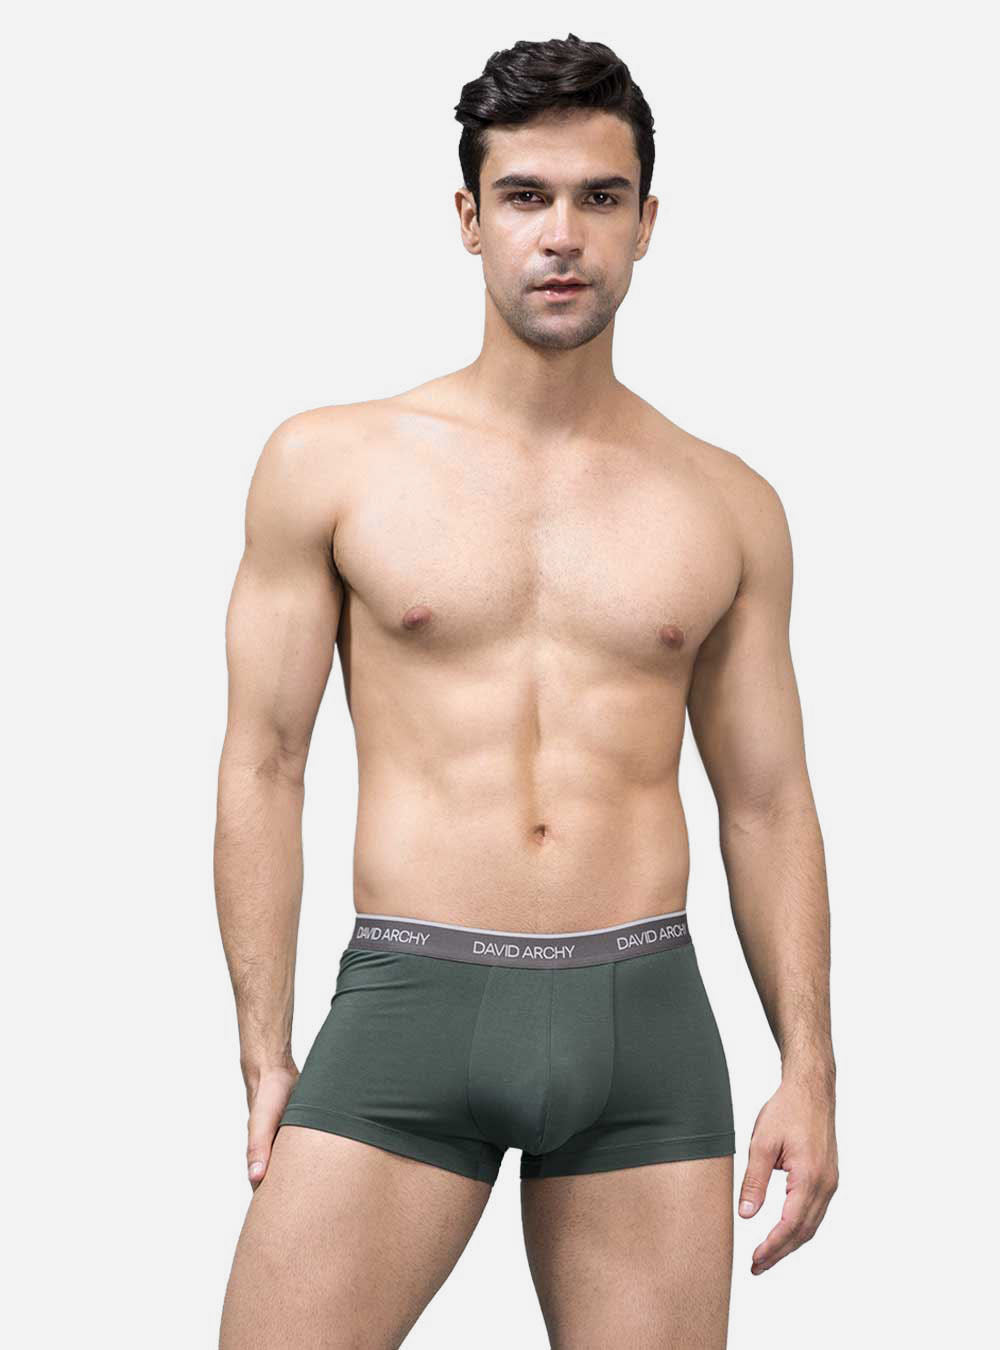 DAVID ARCHY Men's Underwear Ultra Soft Comfy Breathable Bamboo Rayon Trunks  in 4